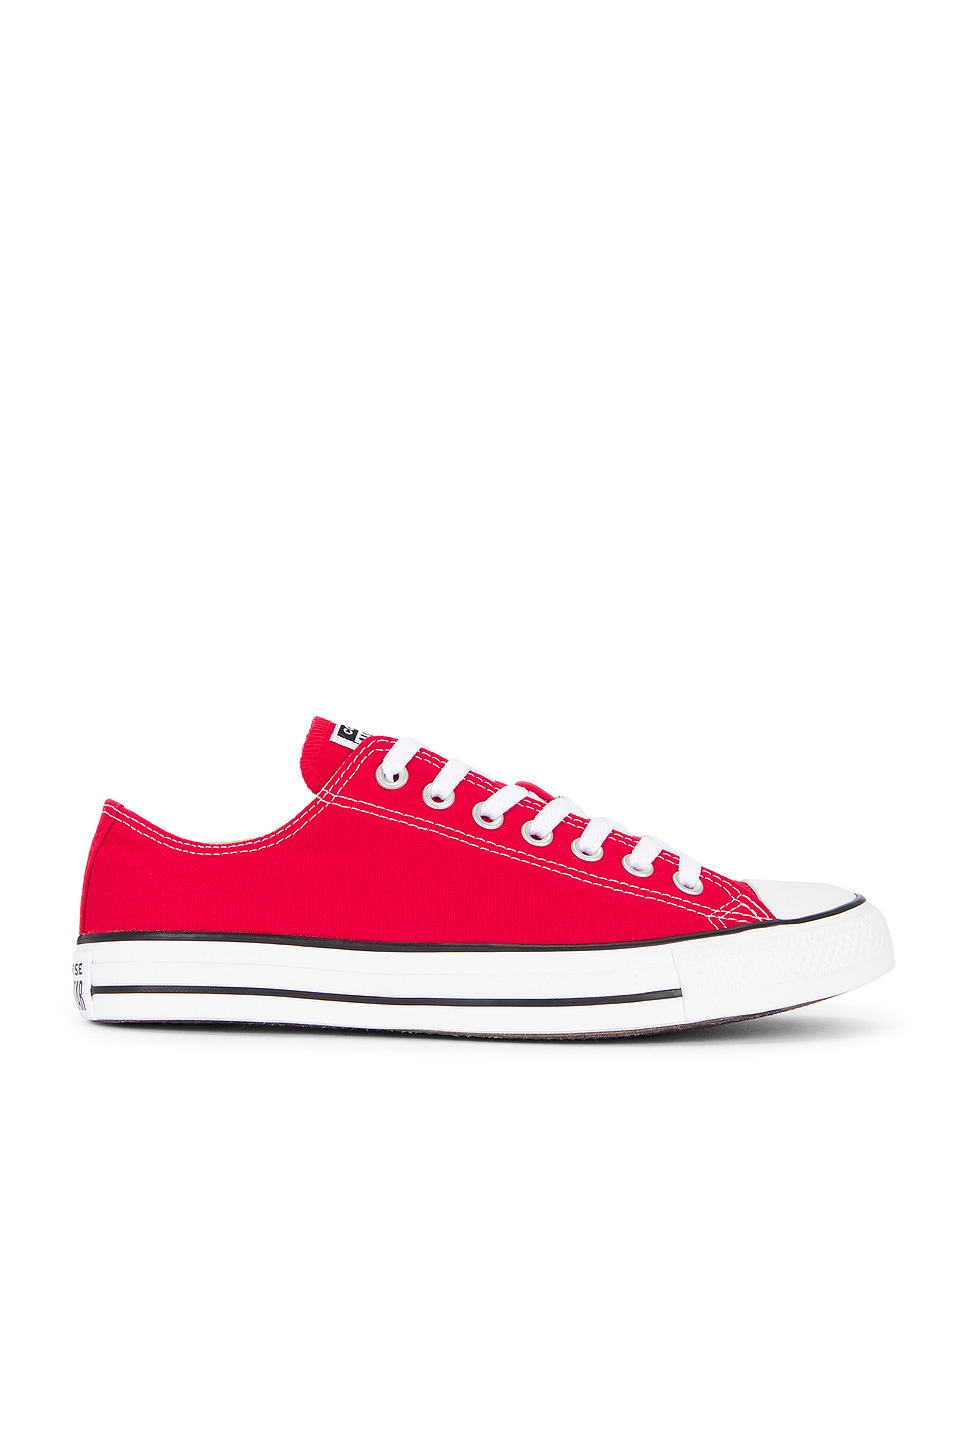 Image 1 of Converse Chuck Taylor All Star Classic in Red